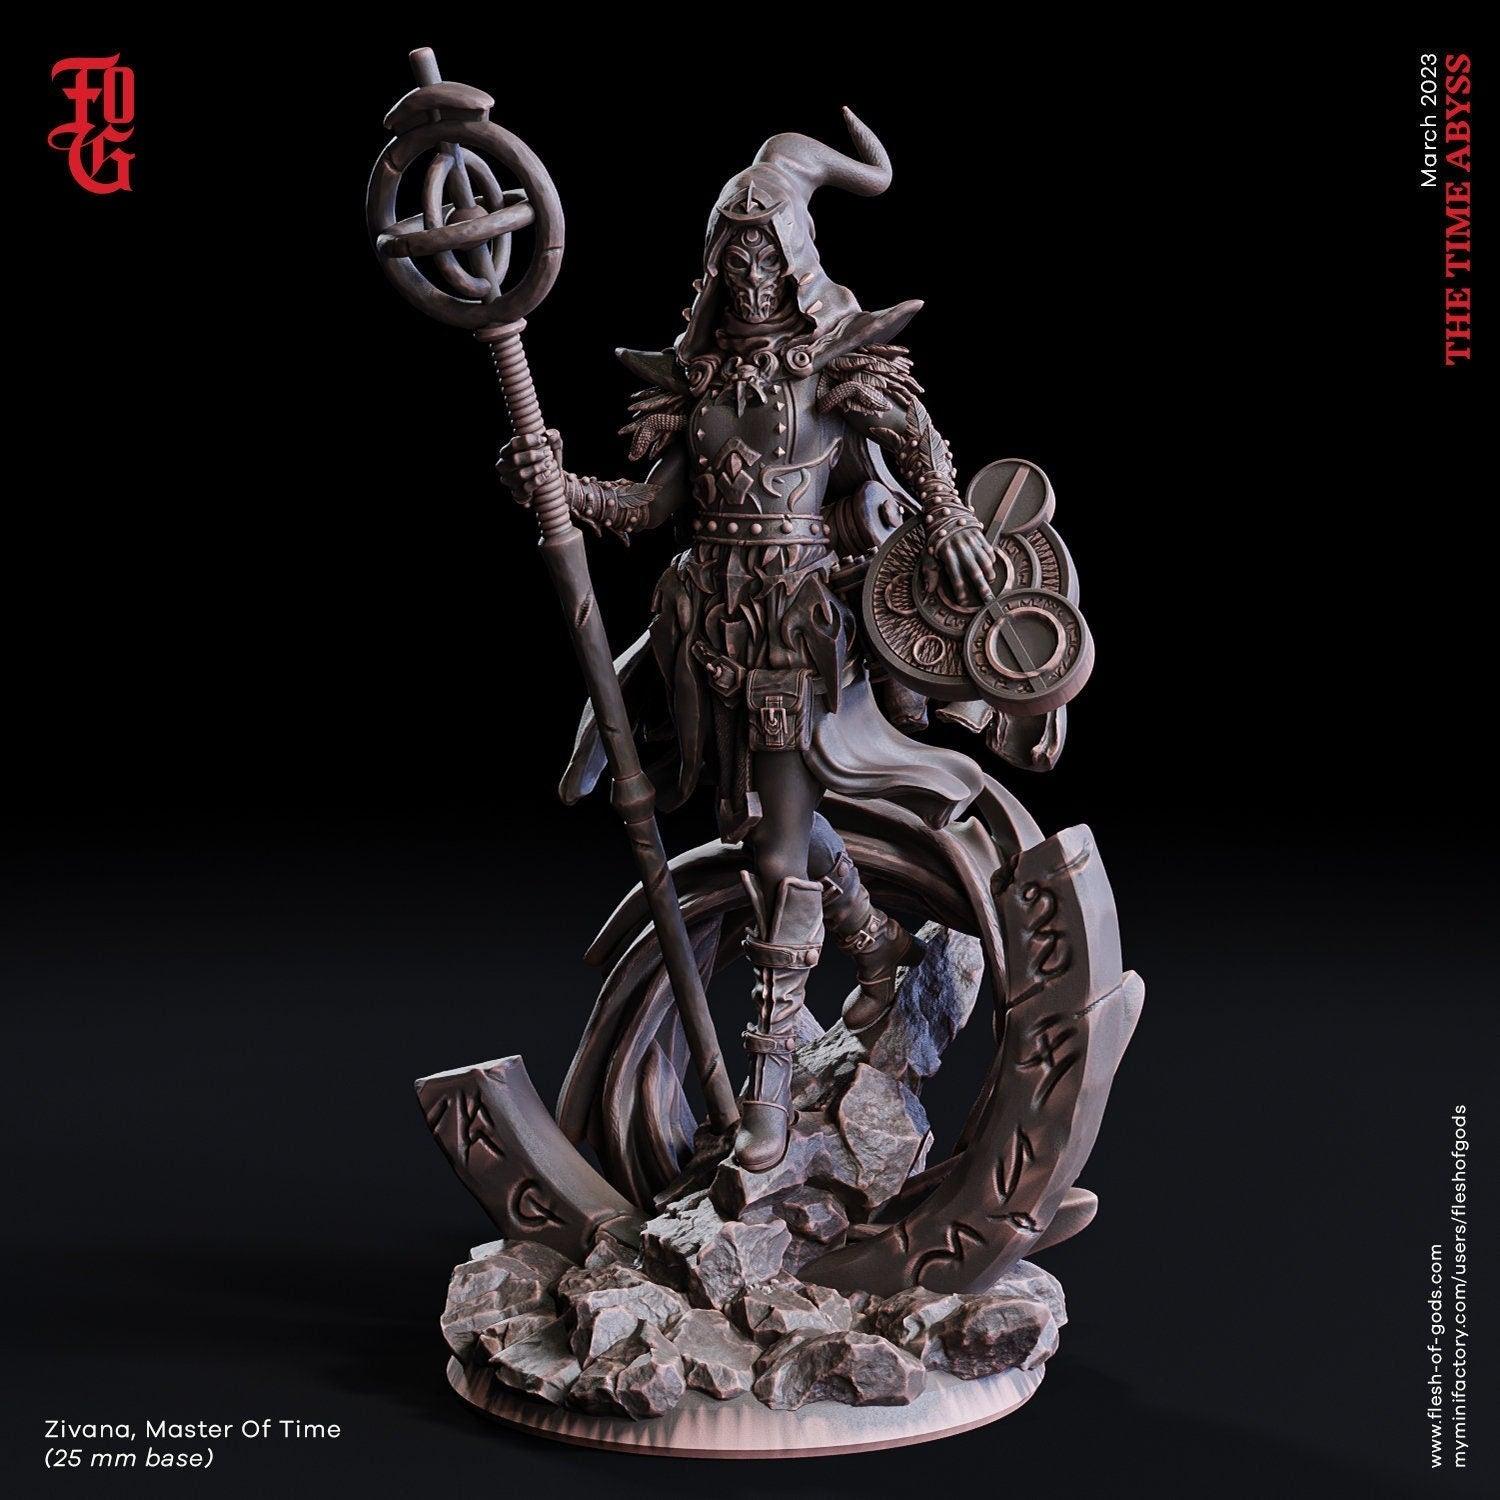 Master of Time miniature | 25mm Base | DnD Miniature Dungeons and Dragons DnD 5e class | school of time magic spellcaster mini - Plague Miniatures shop for DnD Miniatures